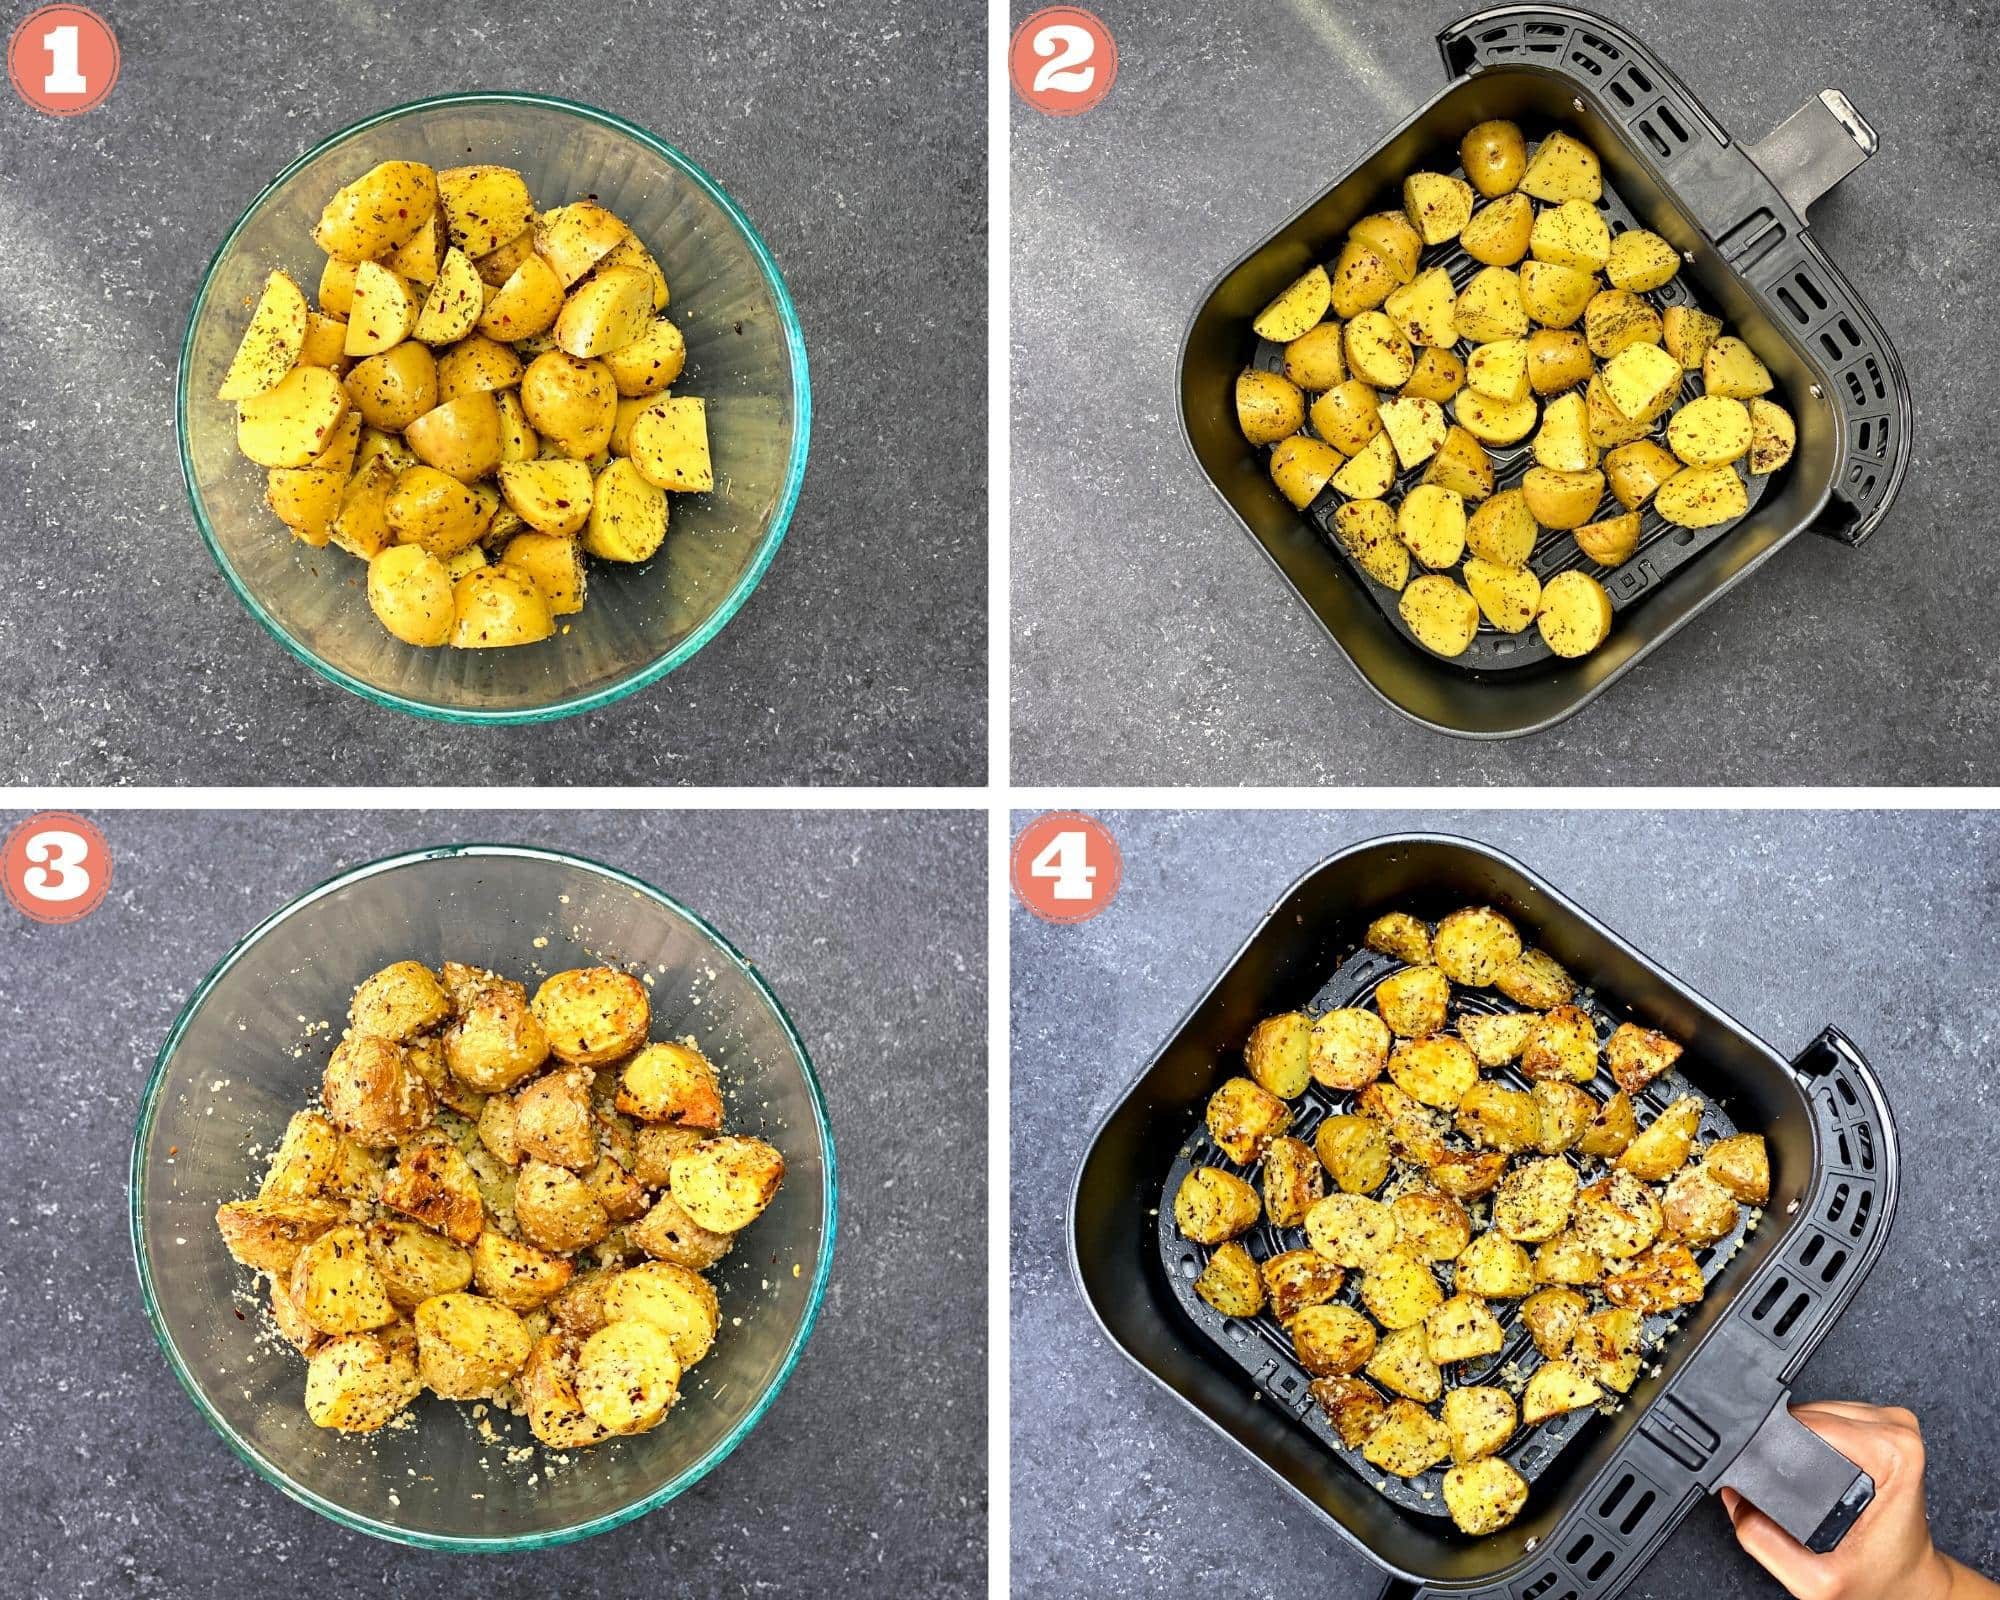 4-image grid showing steps 1-4 of cooking potatoes in the air fryer